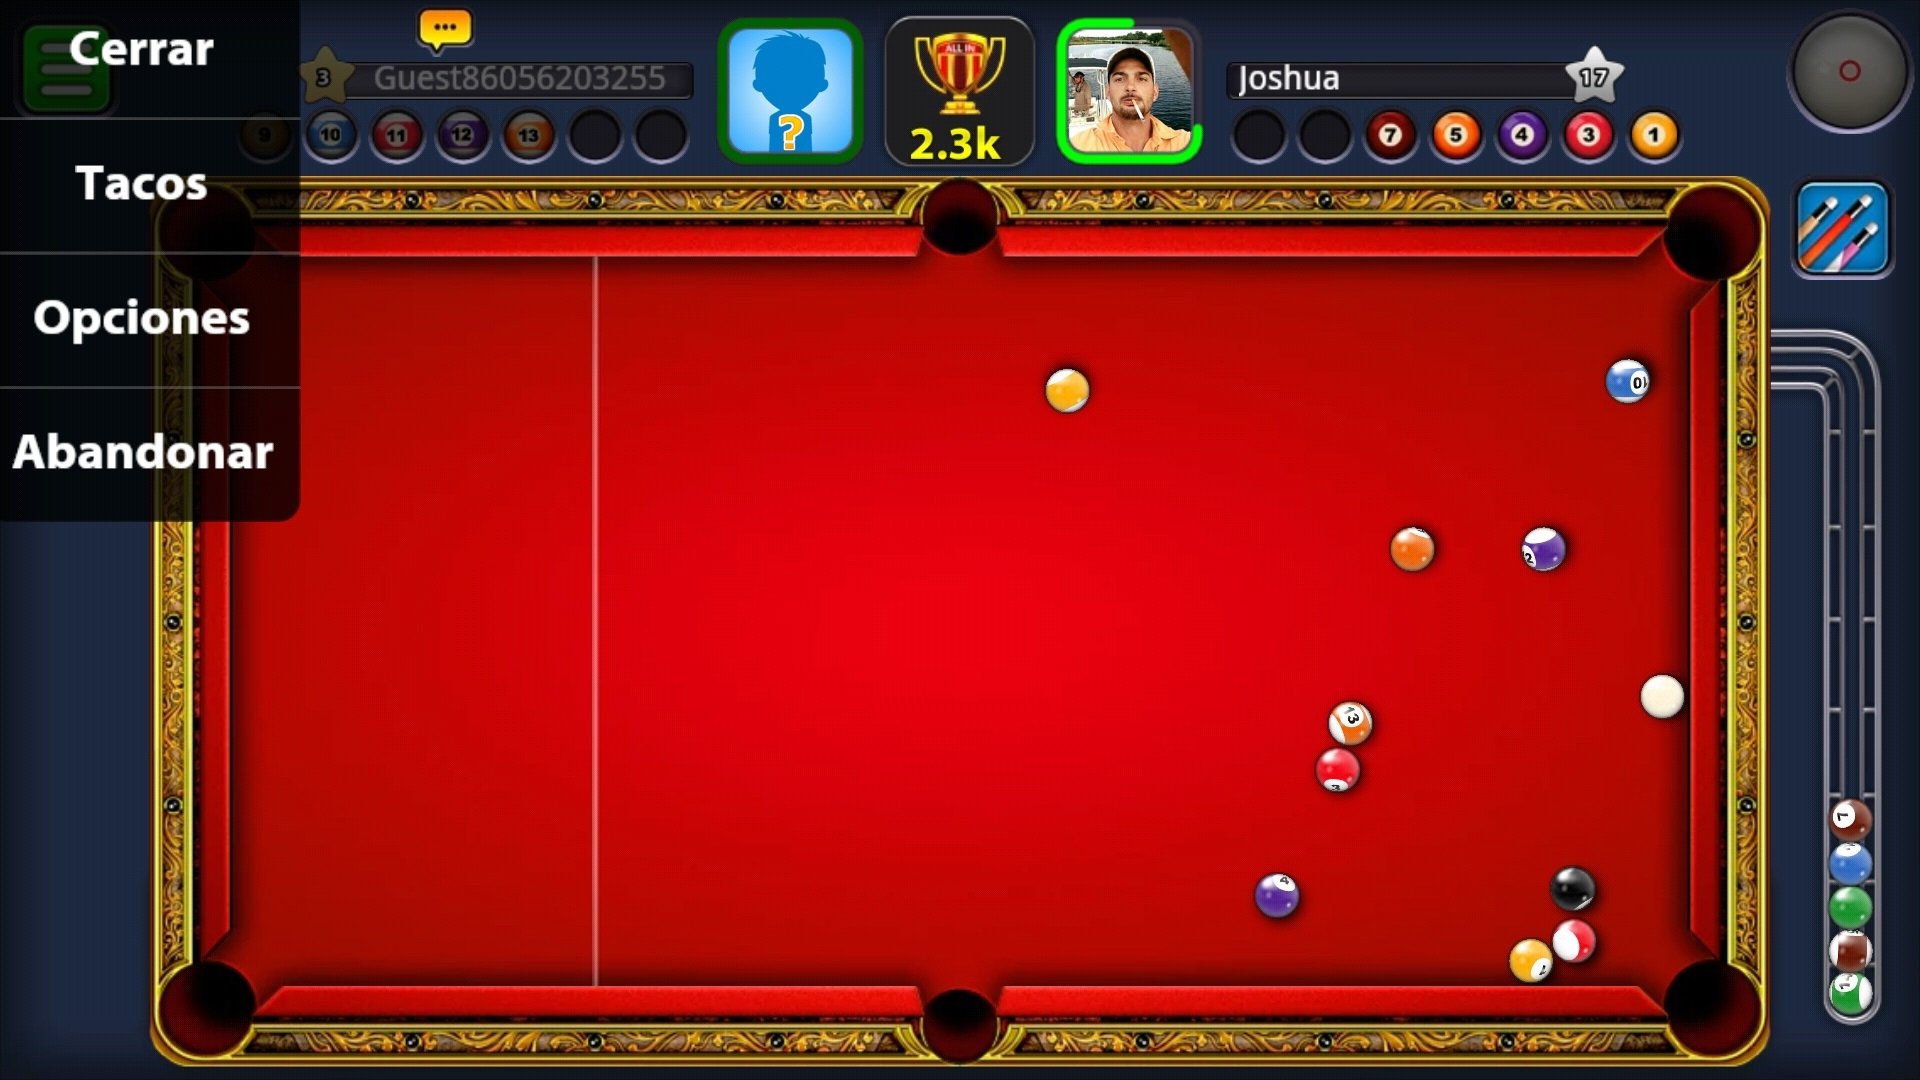 8 Ball Pool 4.6.2 - Download for Android APK Free - 